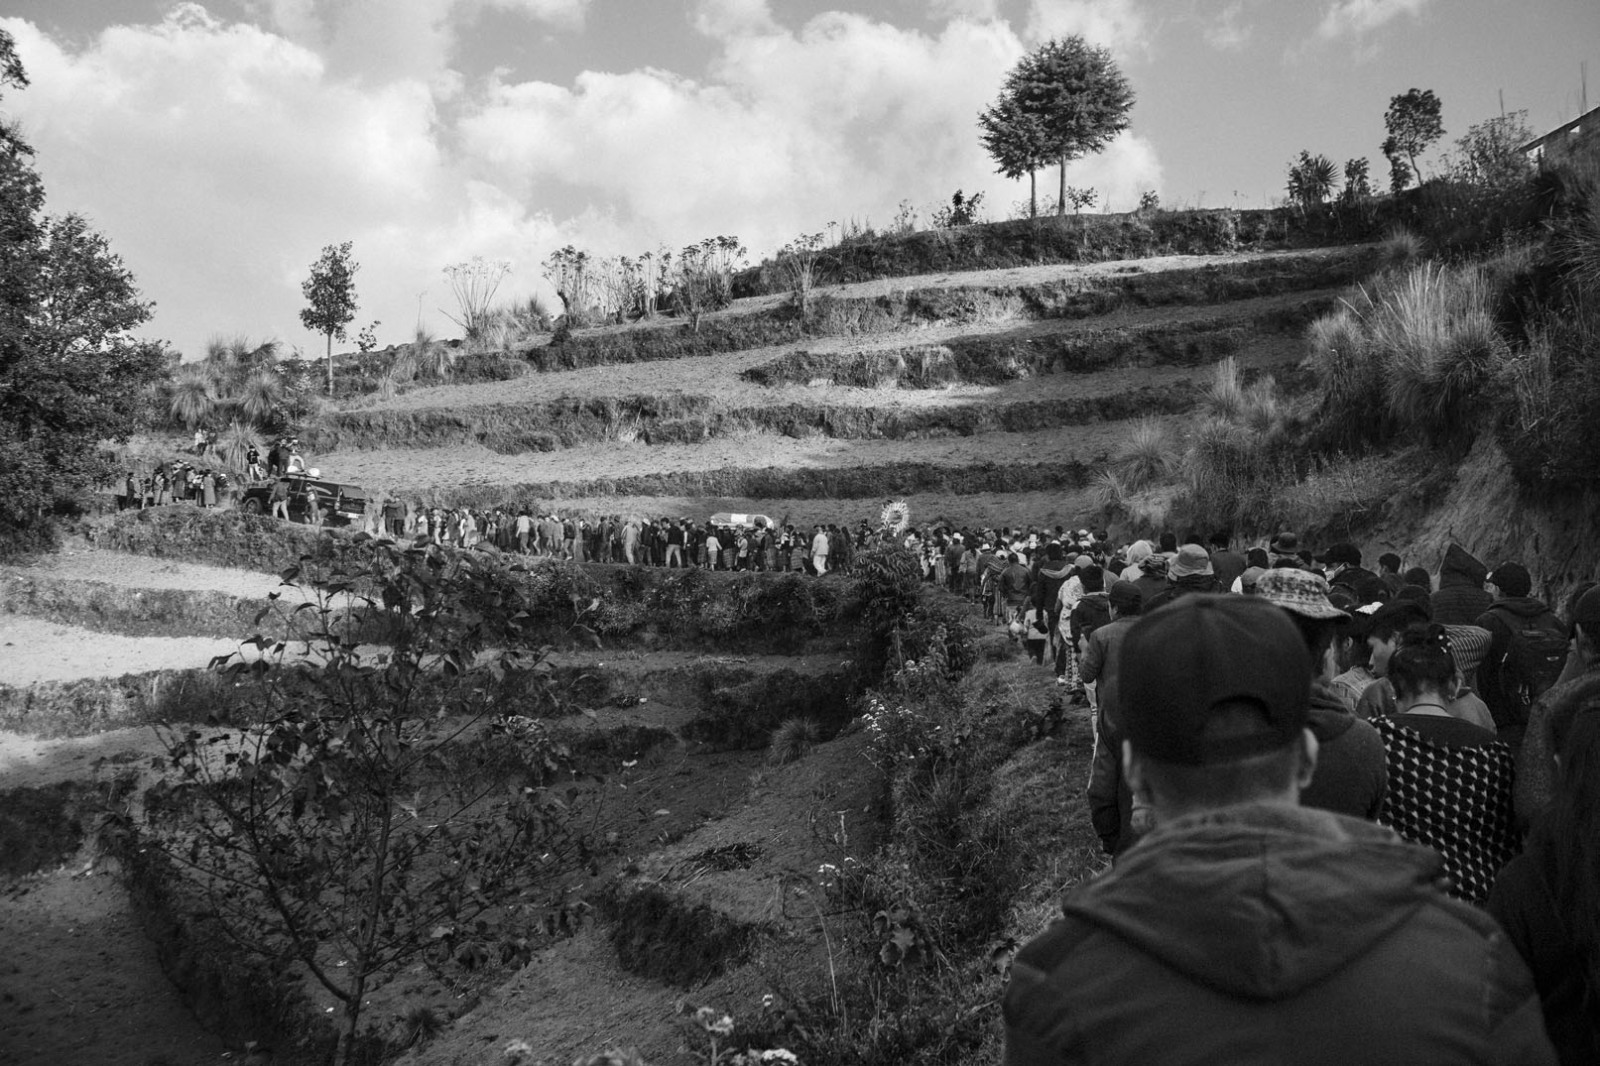 People move towards the Tuilelen's cemetery during the funeral of Rivaldo Jimenez Ramirez, Santa Cristina Garcia, and Ivan Gudiel Pablo in Comitancillo, Guatemala, on March 14, 2021.
On January 22, 2021, nineteen charred bodies were found on a country road in Tamaulipas, Mexico's northeastern state bordering the United States. Sixteen of the victims were Guatemalan, thirteen from the same village, Comitancillo, and the others were of Mexican descent. The bodies were inside a pickup truck, hit by 113 bullets, and burned.  
The massacre, according to investigators, would be linked to a dispute between criminal groups for the control of migrant routes. Twelve police officers are under trial for allegedly having committed the crime.
Each migrant had sold properties and incurred debts to pay up to 11 thousand dollars to a trafficker who had ensured they would have entered the United States. Their goal was to find a job to pay the debt back and send money to their families. The entire community welcomed journalists and photographers in their homes and during the three-day funeral processions hoping that, by the world knowing their suffering, such an event would not occur again.